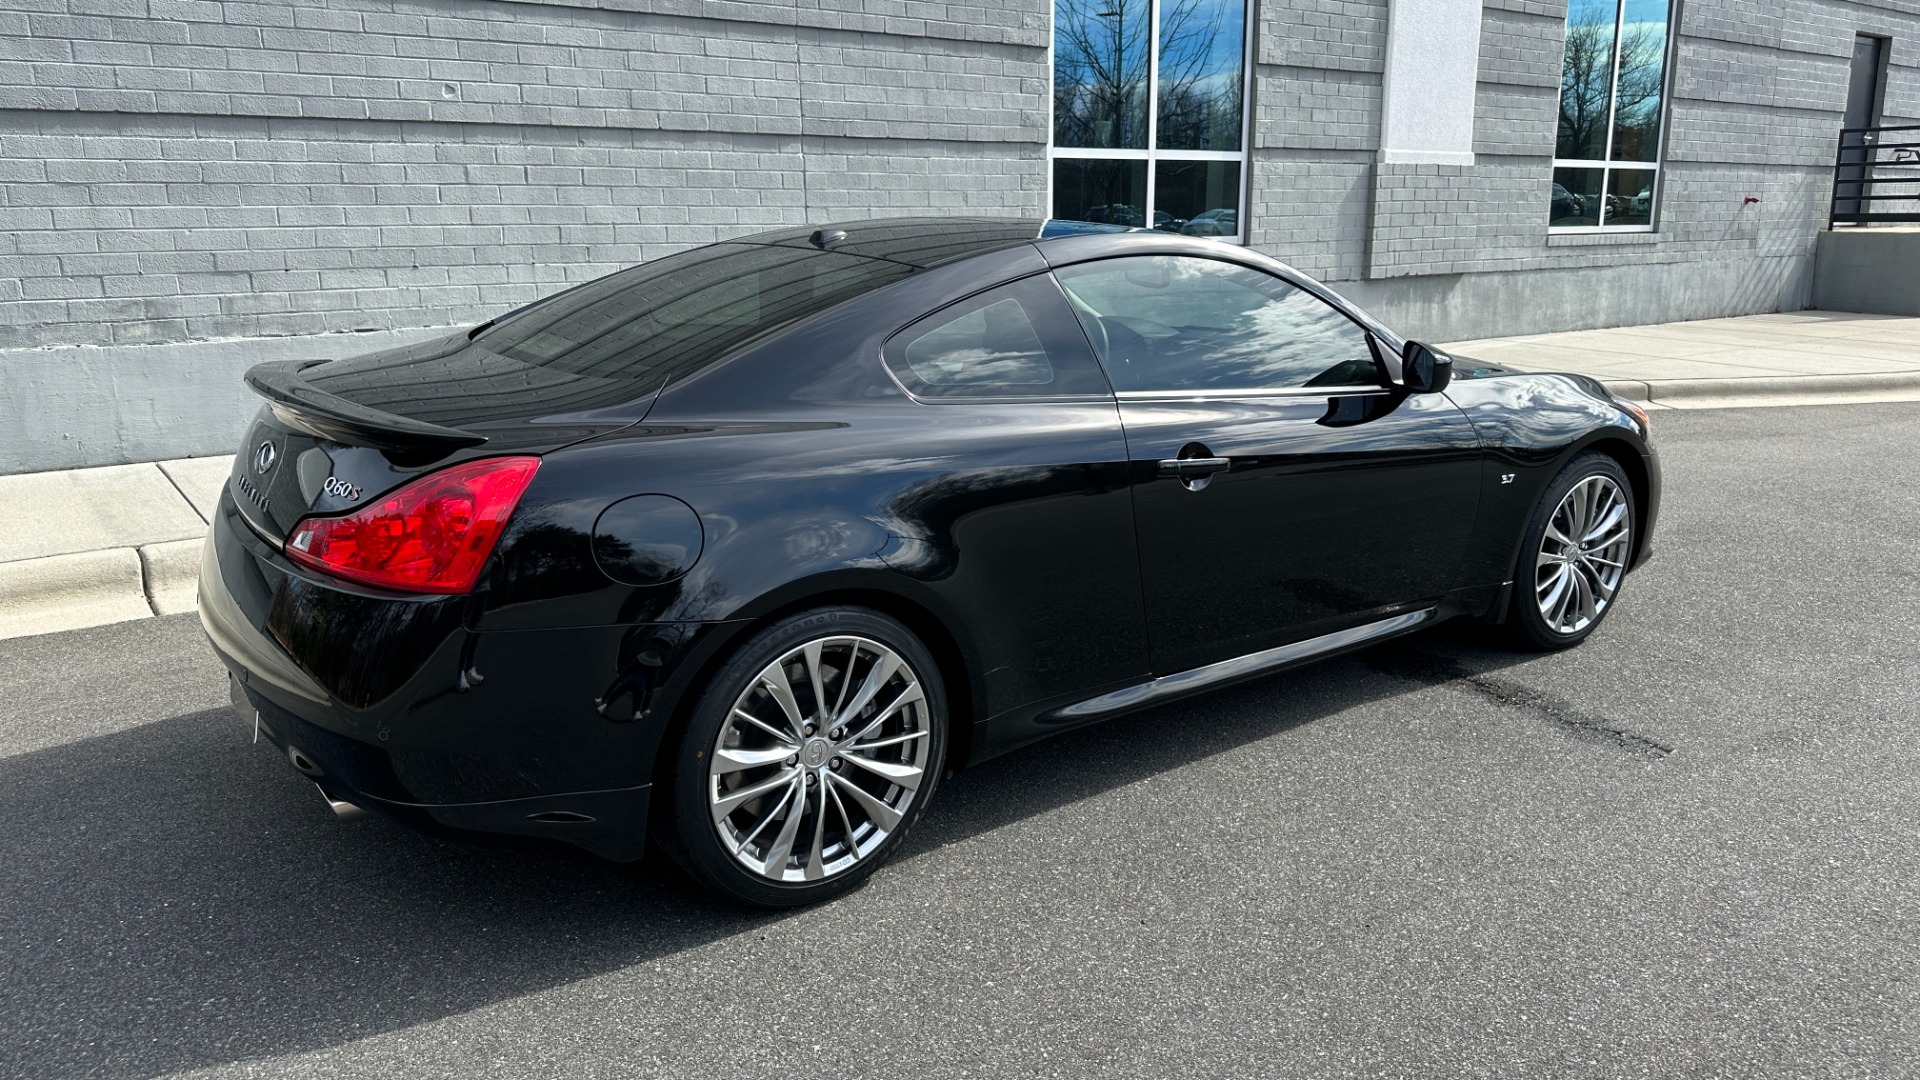 Used 2015 INFINITI Q60 Coupe JOURNEY / SPORT / PREMIUM / NAVIGATION / MIDNIGHT GRILLE for sale Sold at Formula Imports in Charlotte NC 28227 7